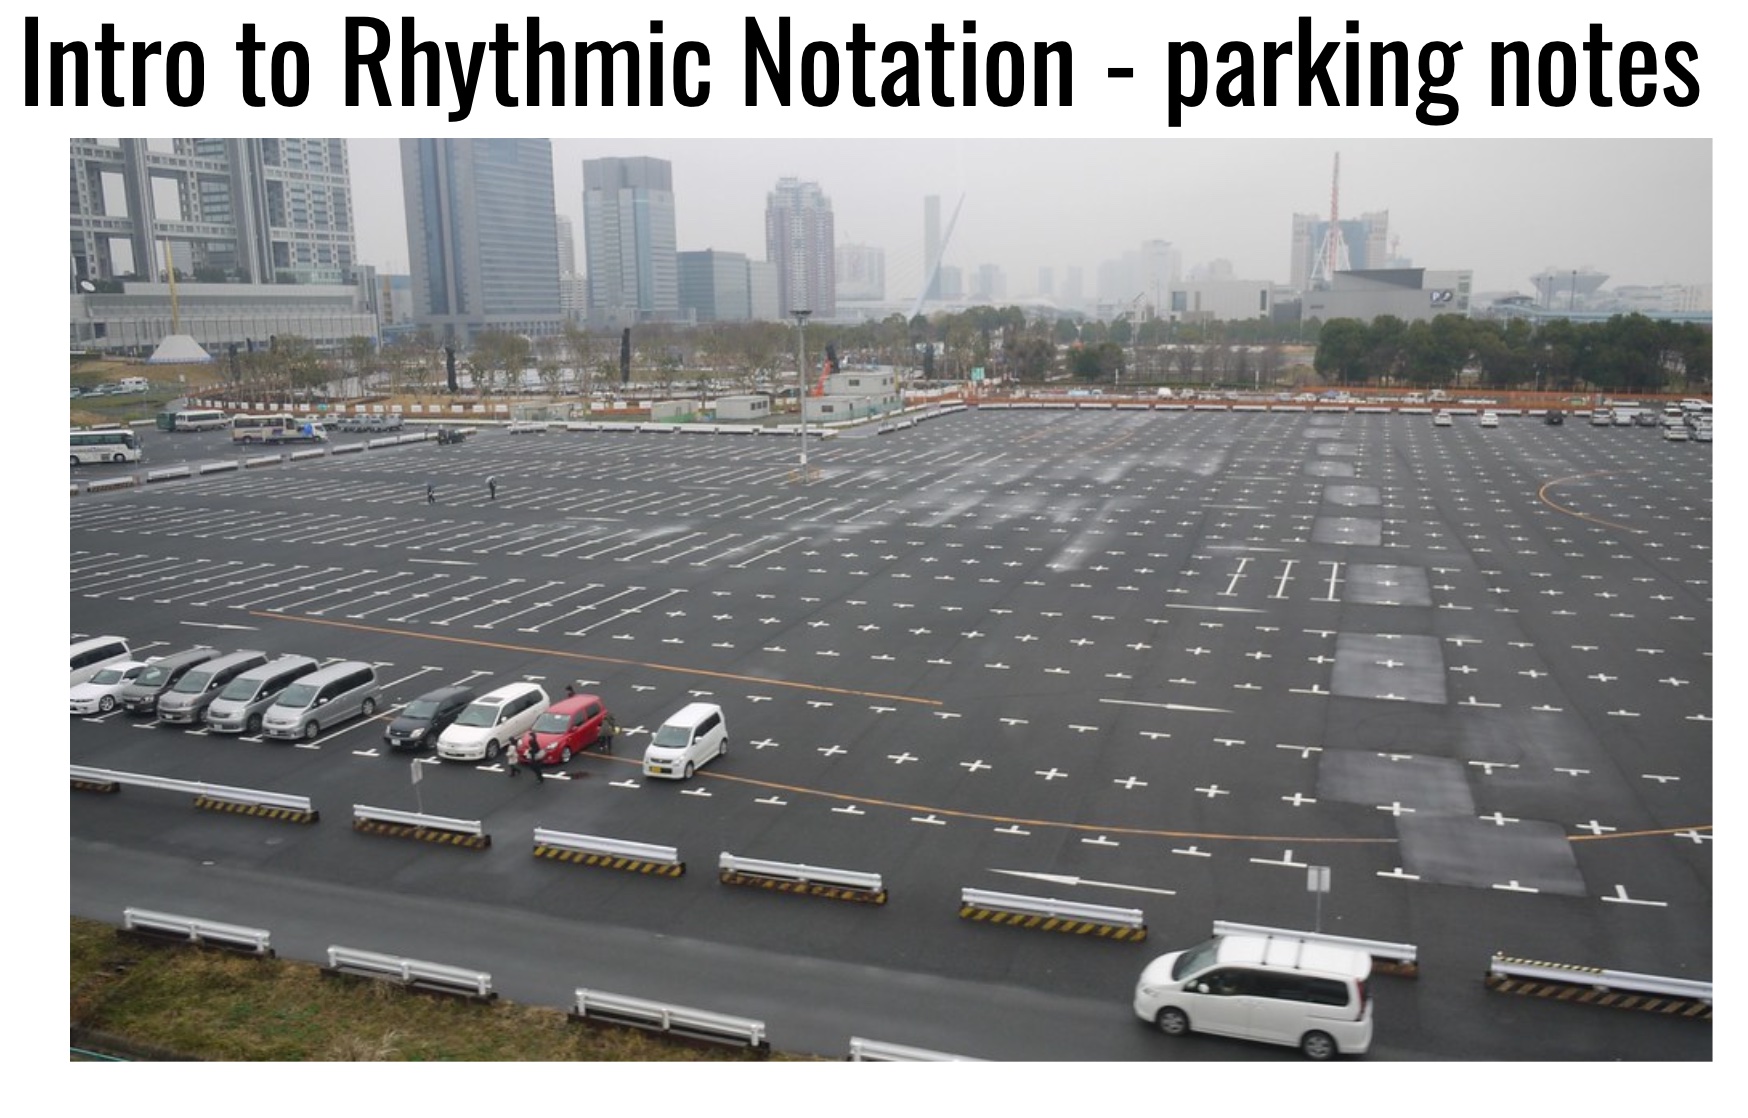 Intro to Rhythm - Parking Lot Notes graphic.